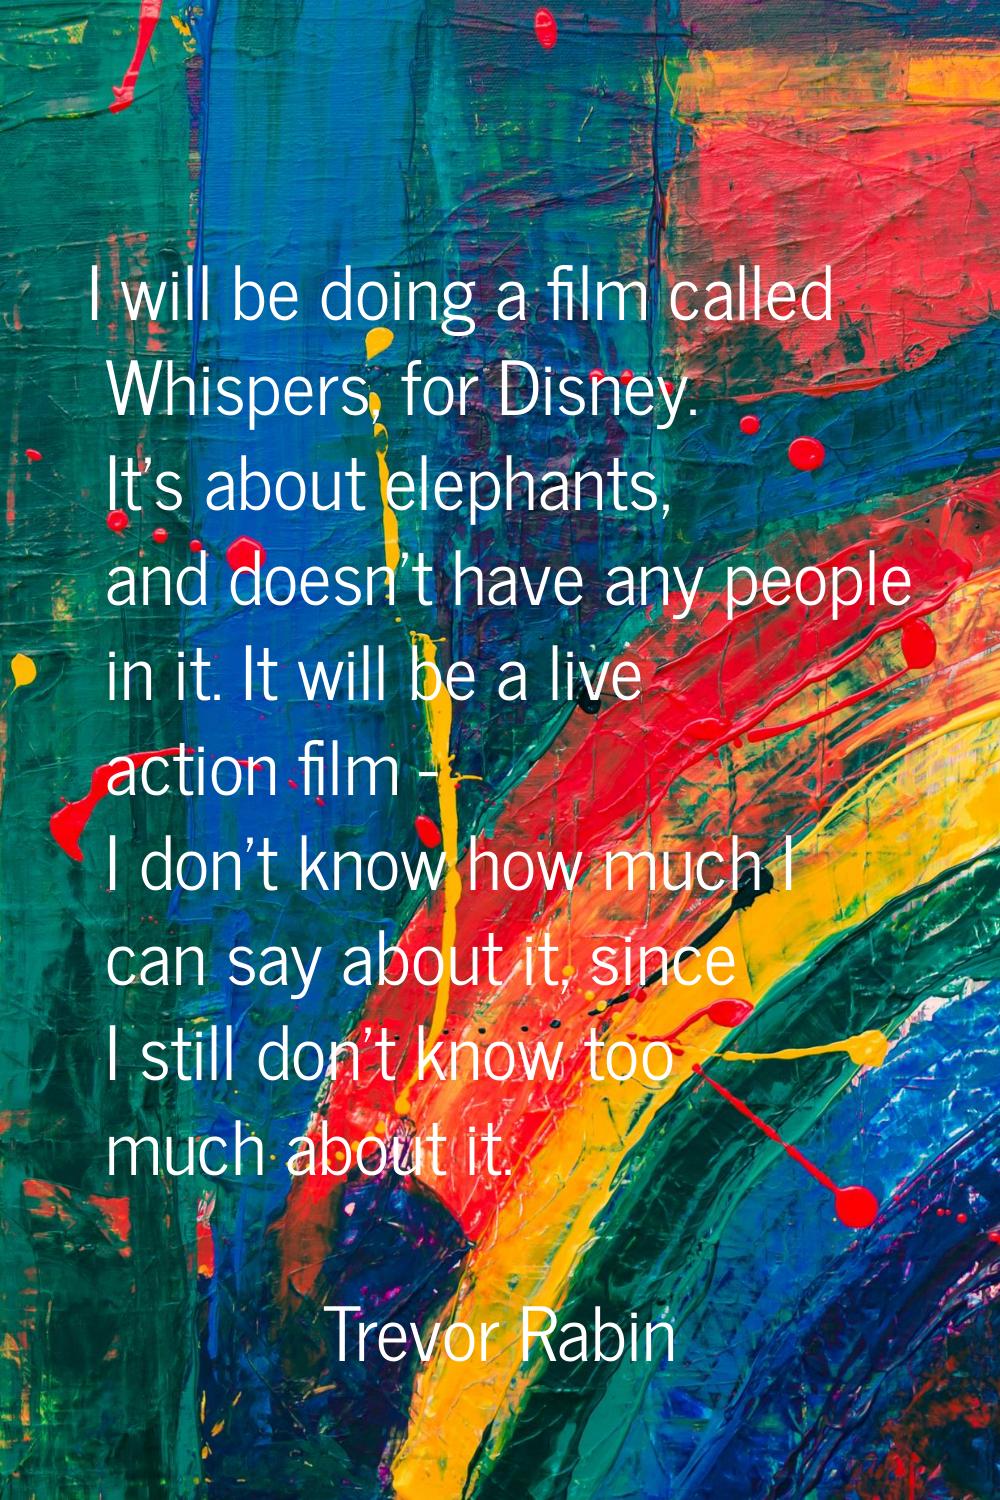 I will be doing a film called Whispers, for Disney. It's about elephants, and doesn't have any peop